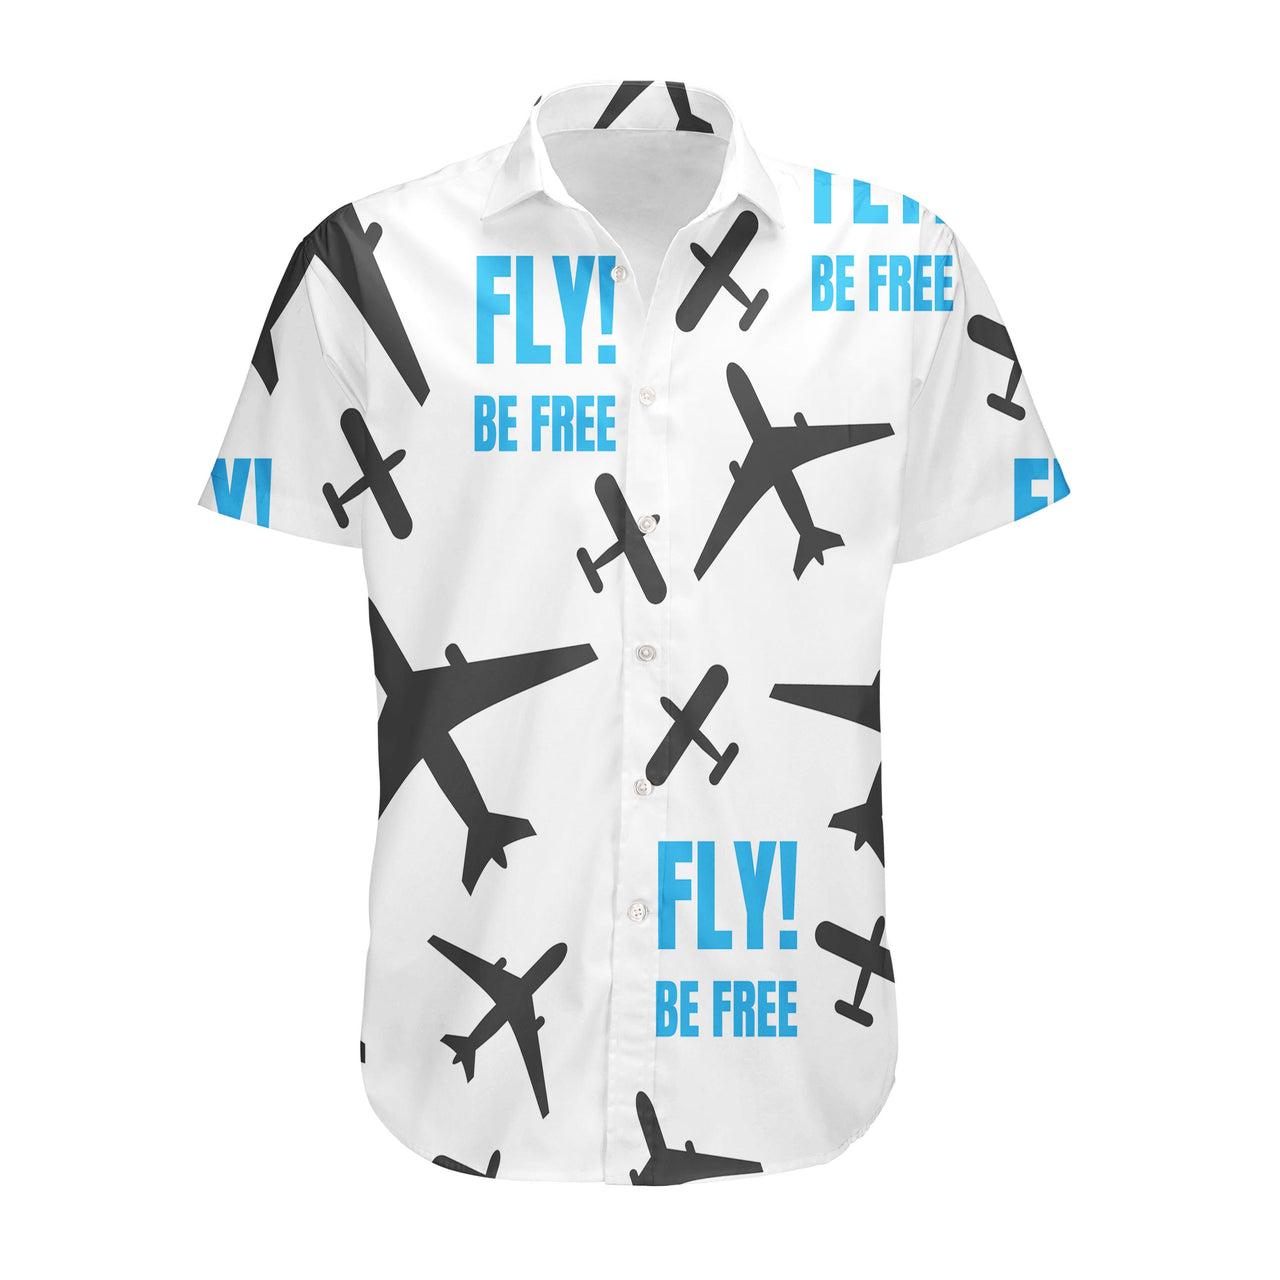 Fly Be Free White Designed 3D Shirts